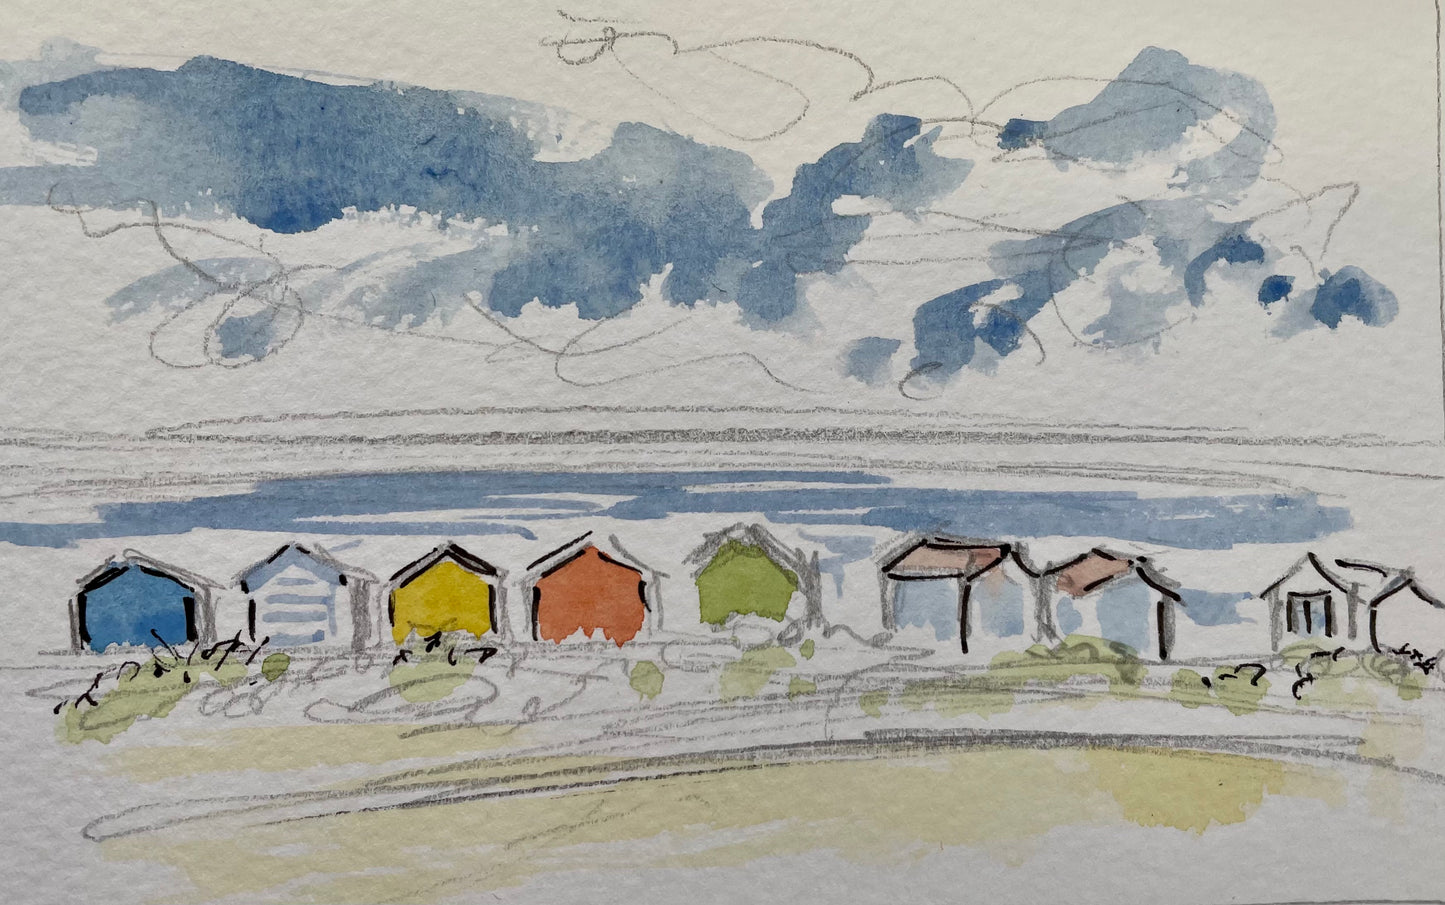 Beach huts on a summer's day